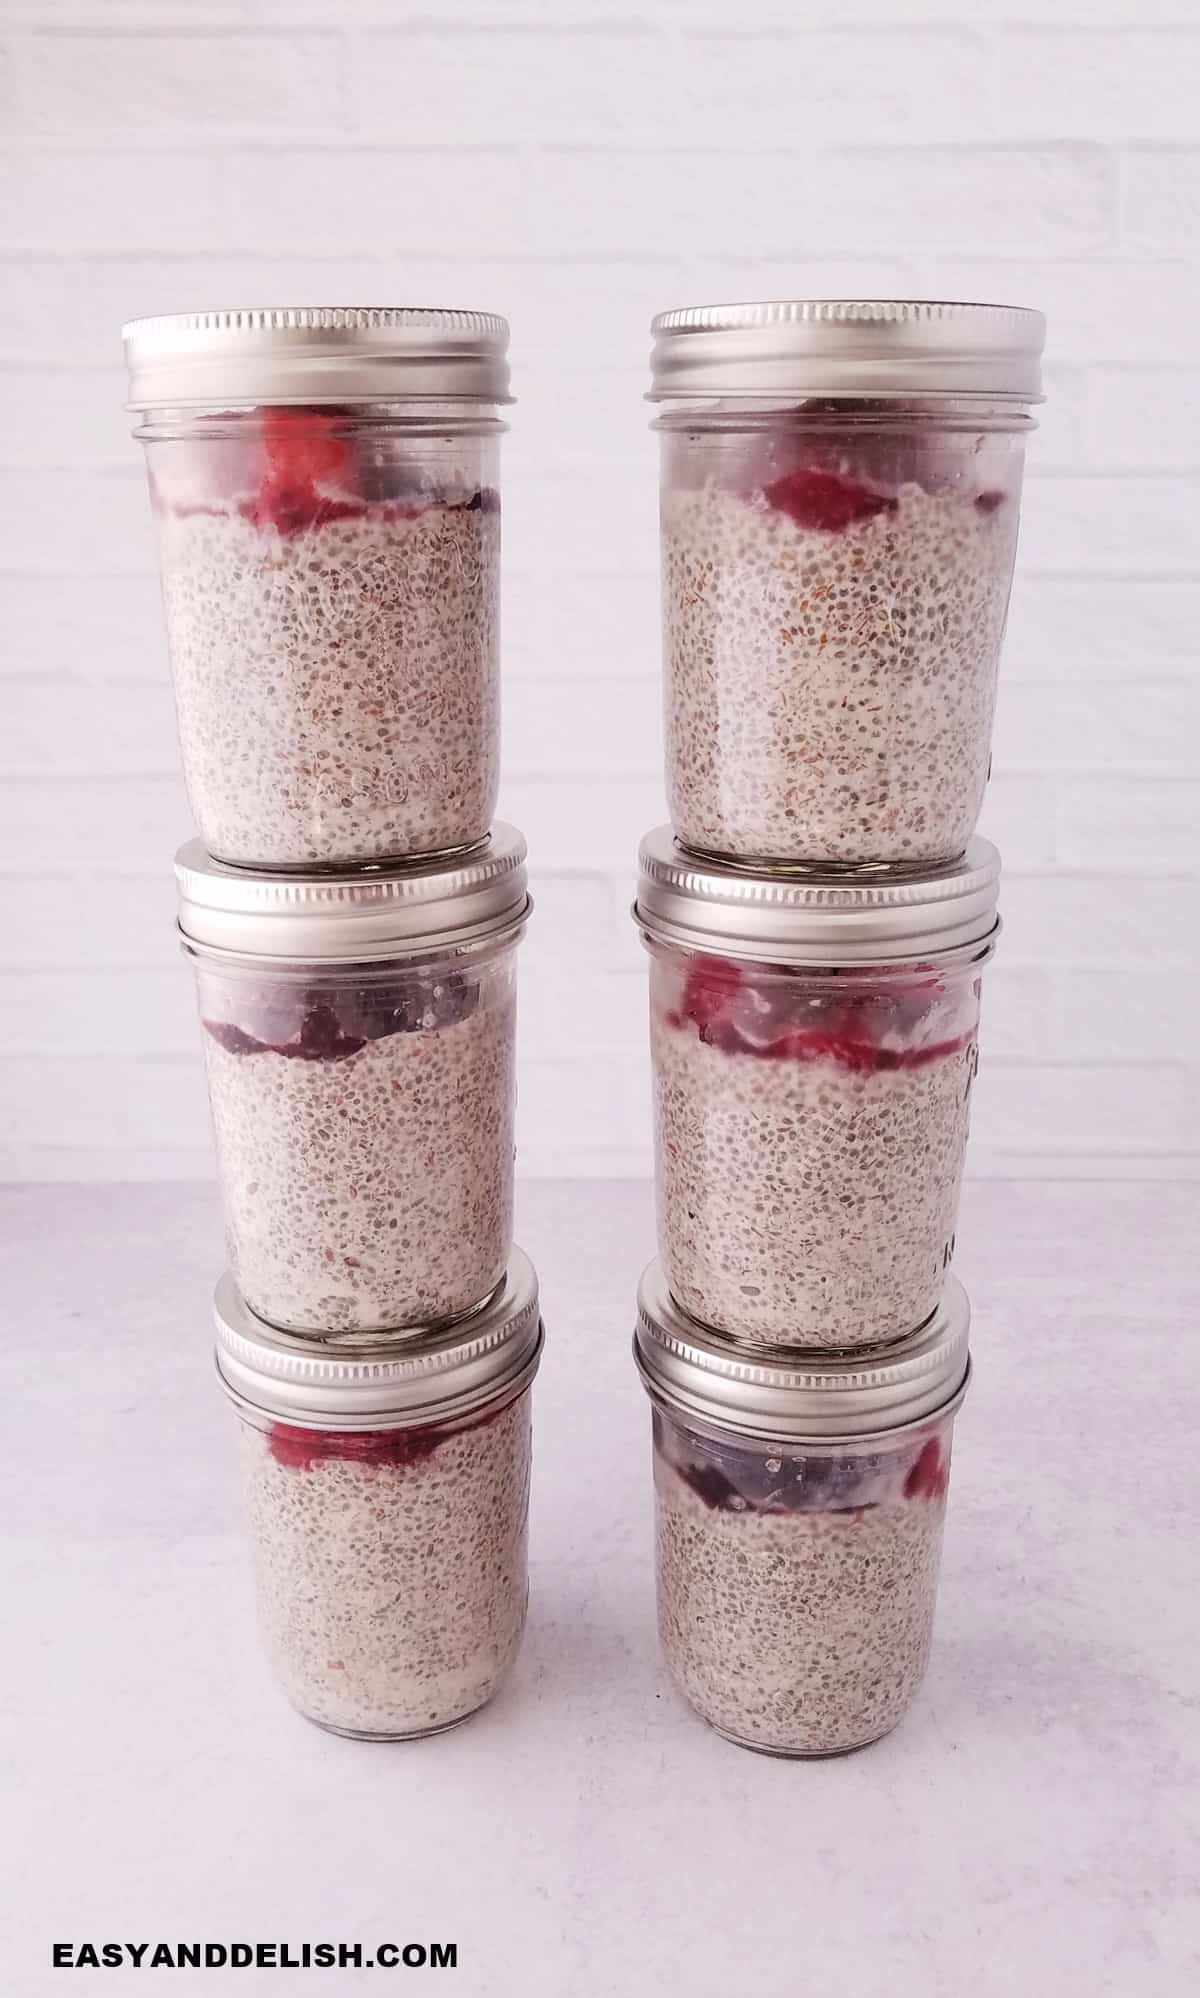 six jars with chia pudding meal prepped for the week.